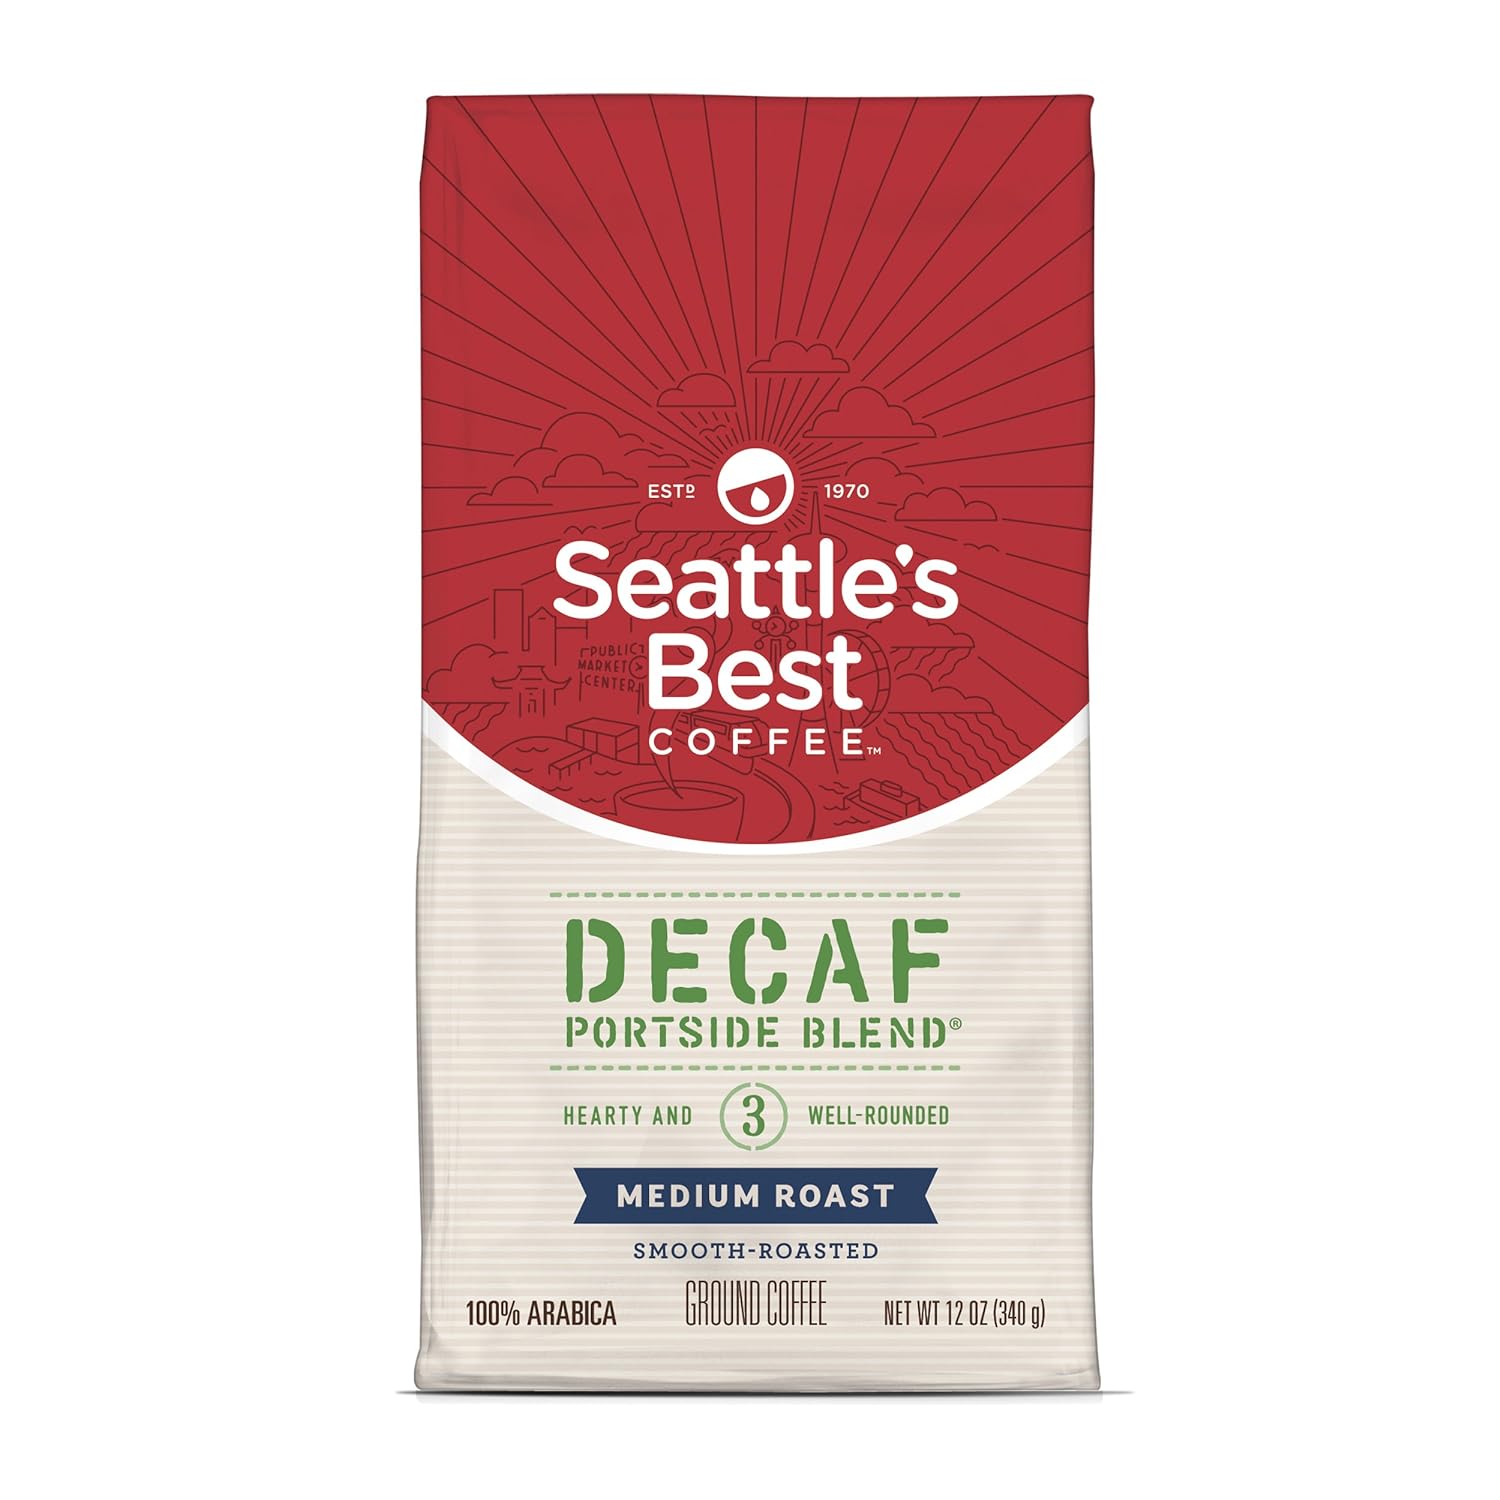 Seattle's Best Coffee Decaf Portside Blend (Previously Signature Blend No. 3) Medium Roast Ground Coffee, 12-Ounce Bag